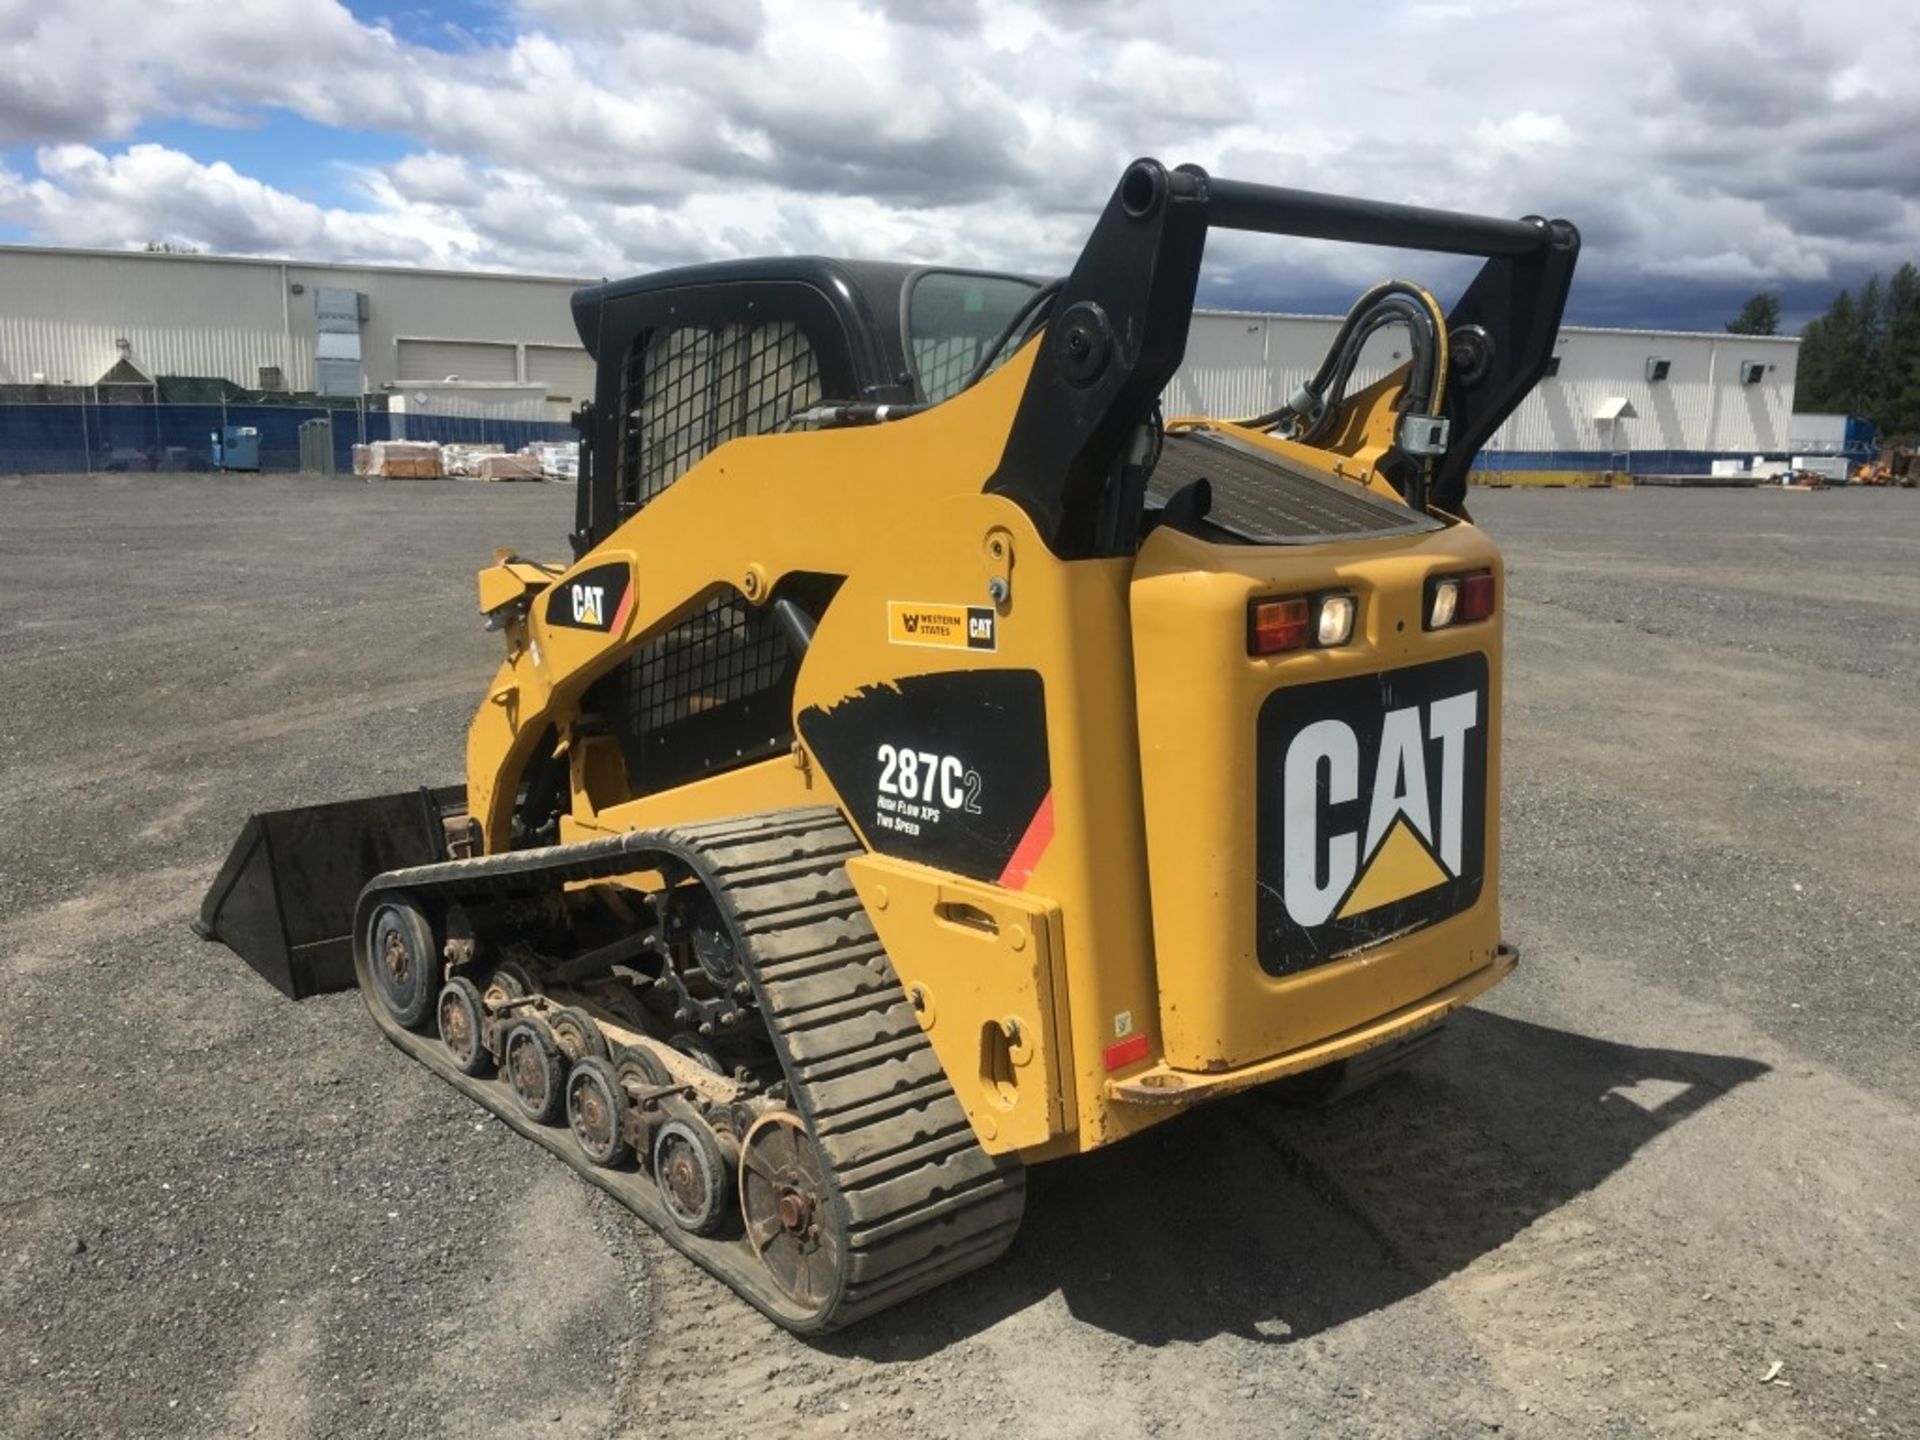 2013 Caterpillar 287C-2 Compact Track Loader - Image 2 of 25